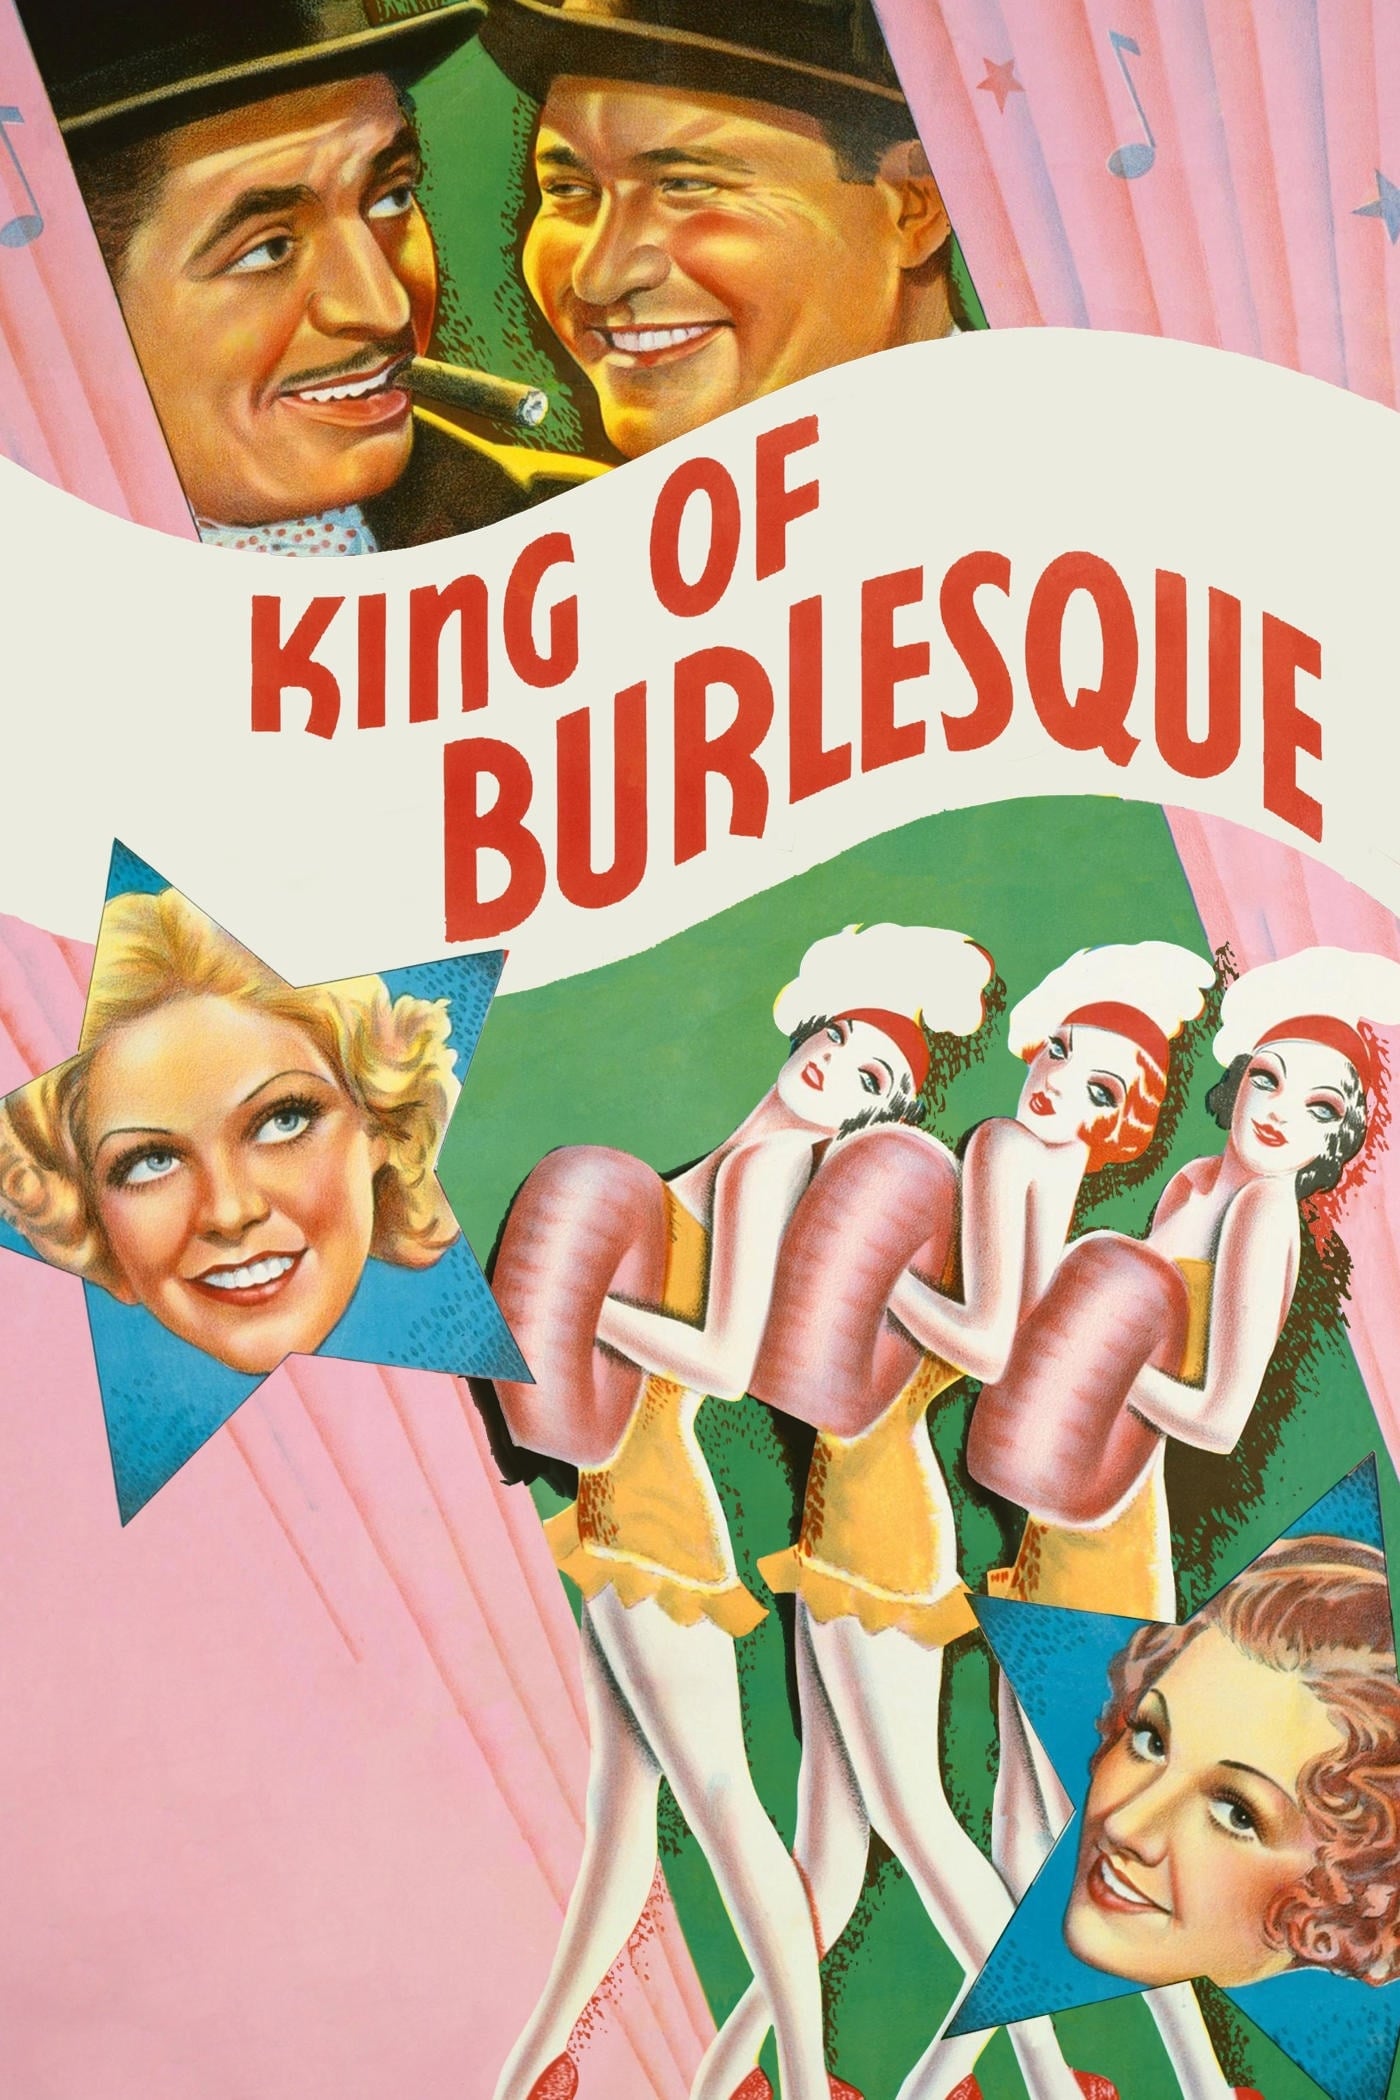 King of Burlesque (1936)